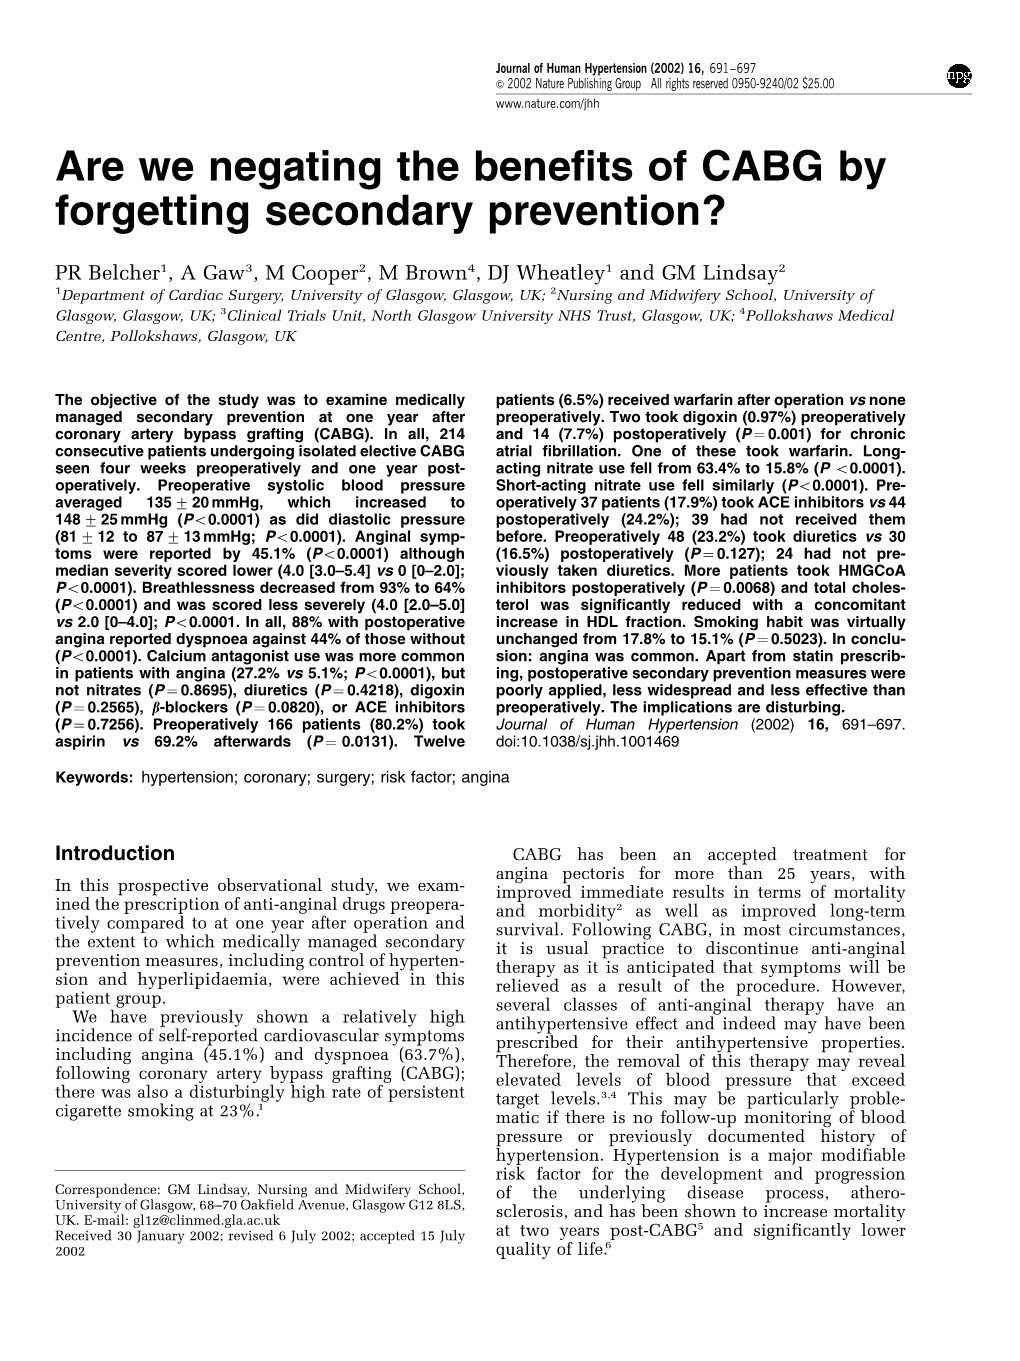 Are We Negating the Benefits of CABG by Forgetting Secondary Prevention?